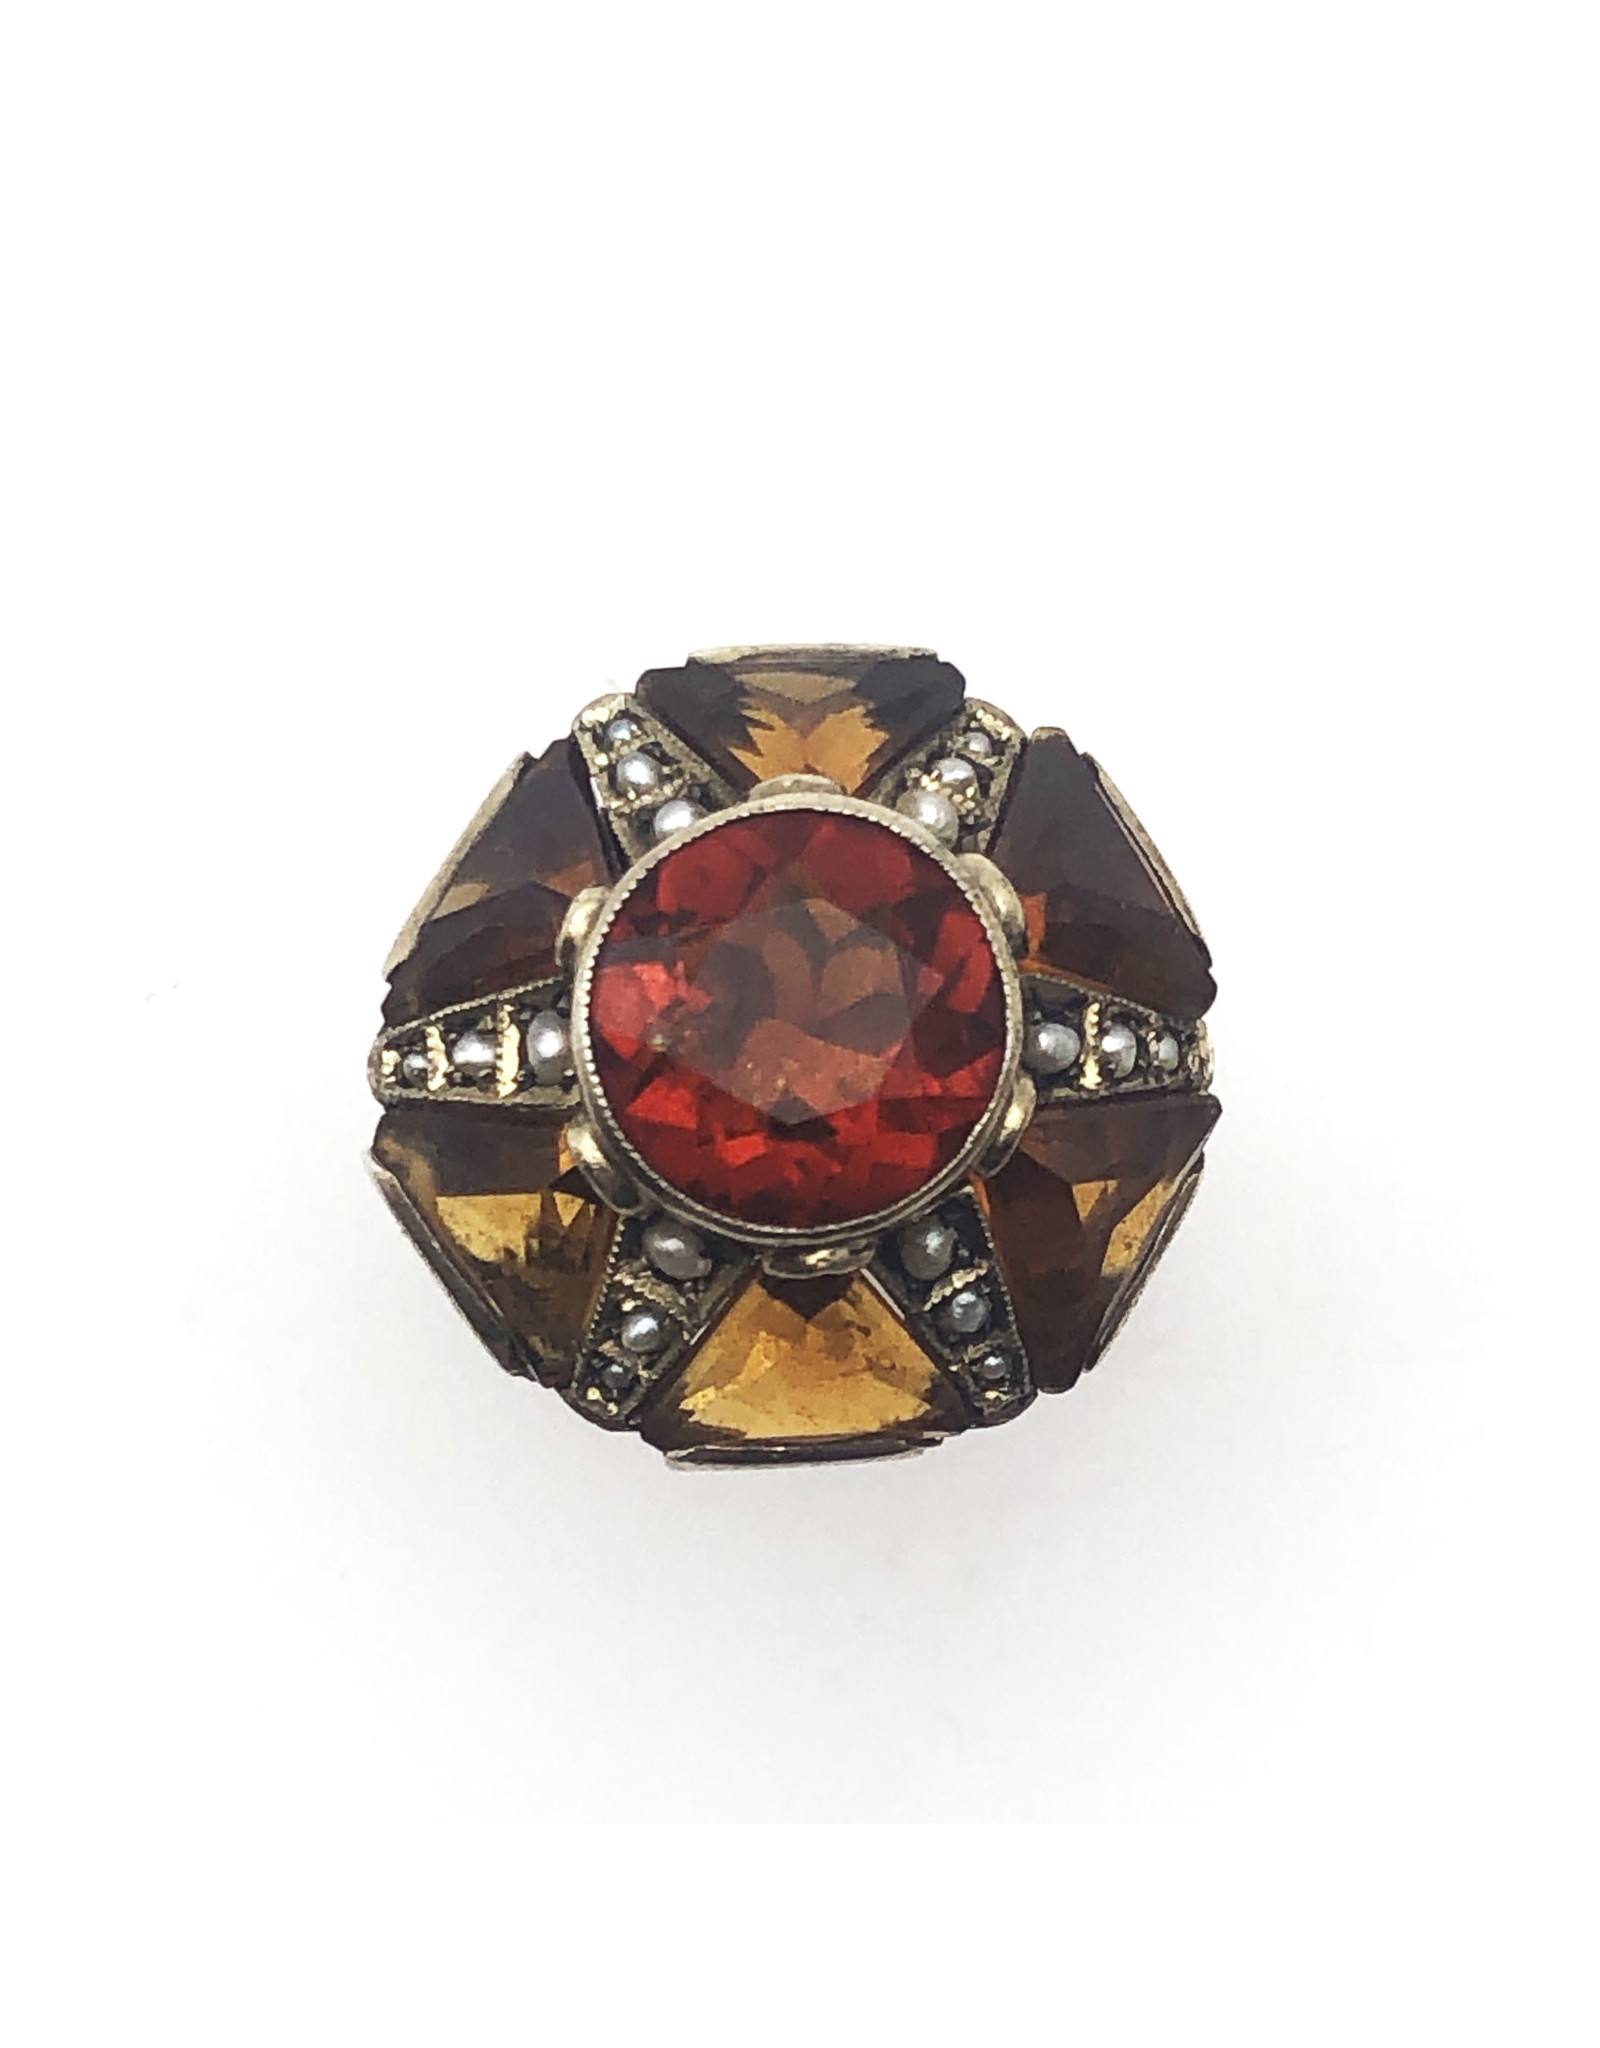 Hexagonal 800 Silver Ring with 7 Orange Citrines and 18 Seed Pearls